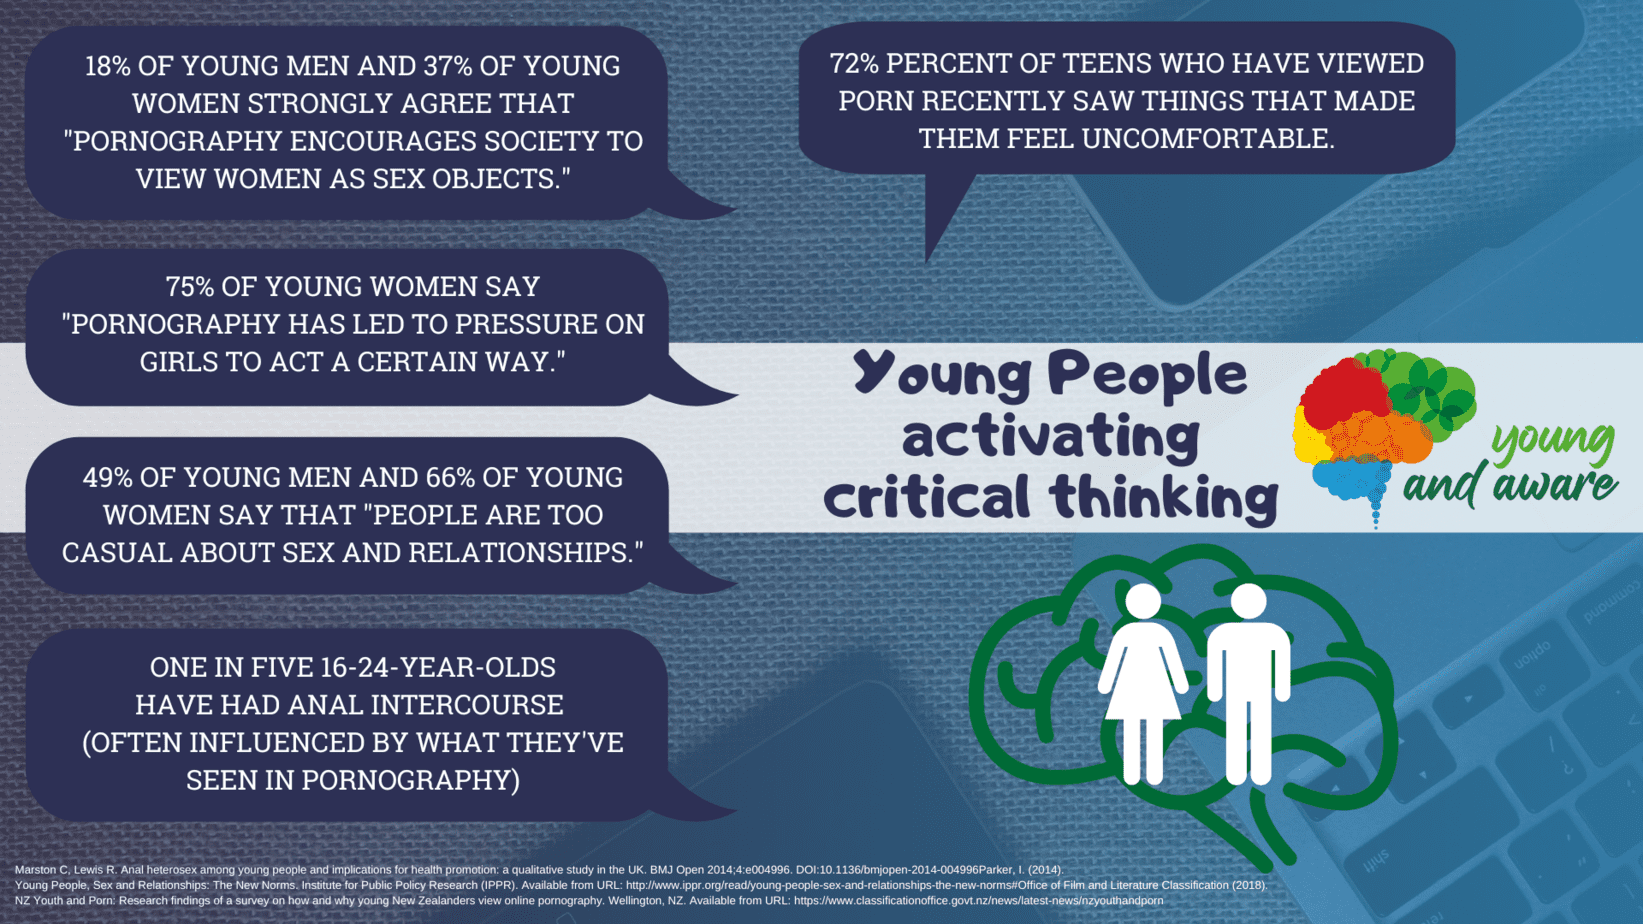 Statistics for critical thinking young people